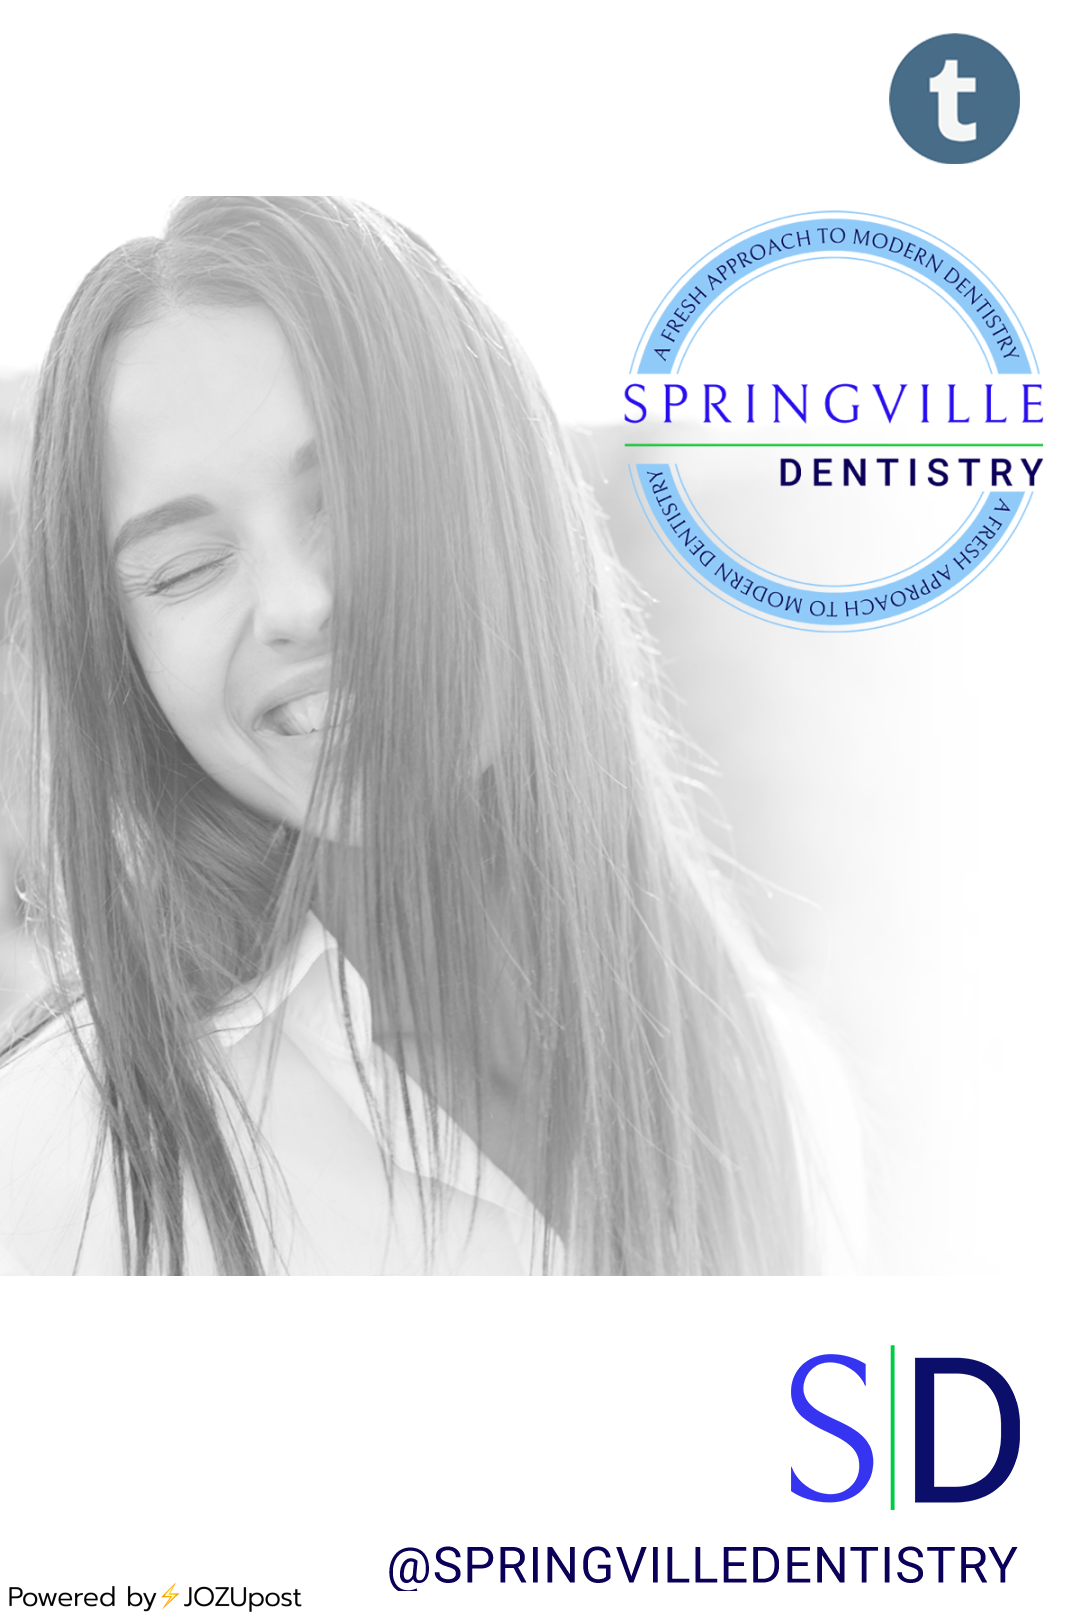 Come and learn the answers to your dental insurance questions at Springville Dentistry. As a Preferred Provider, we accept various insurance plans, including Aetna, Cigna, and Delta Dental. Learn about PPO and why we may not be providers for all...